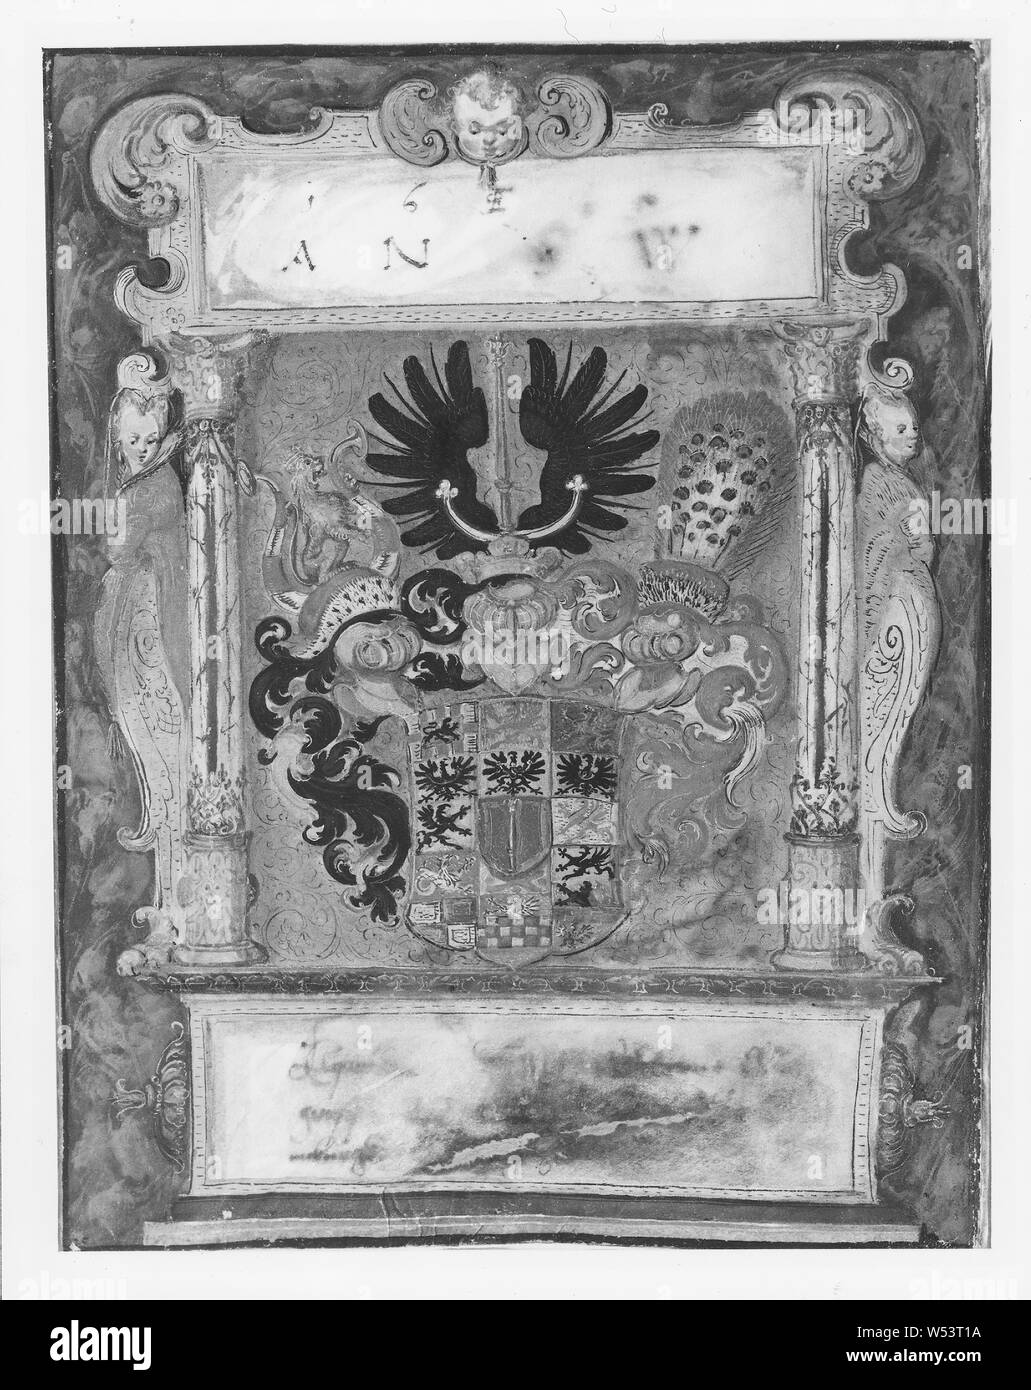 To NMGrh 2433, year 1953, Coat of Arms, painting, Gouache on parchment Stock Photo